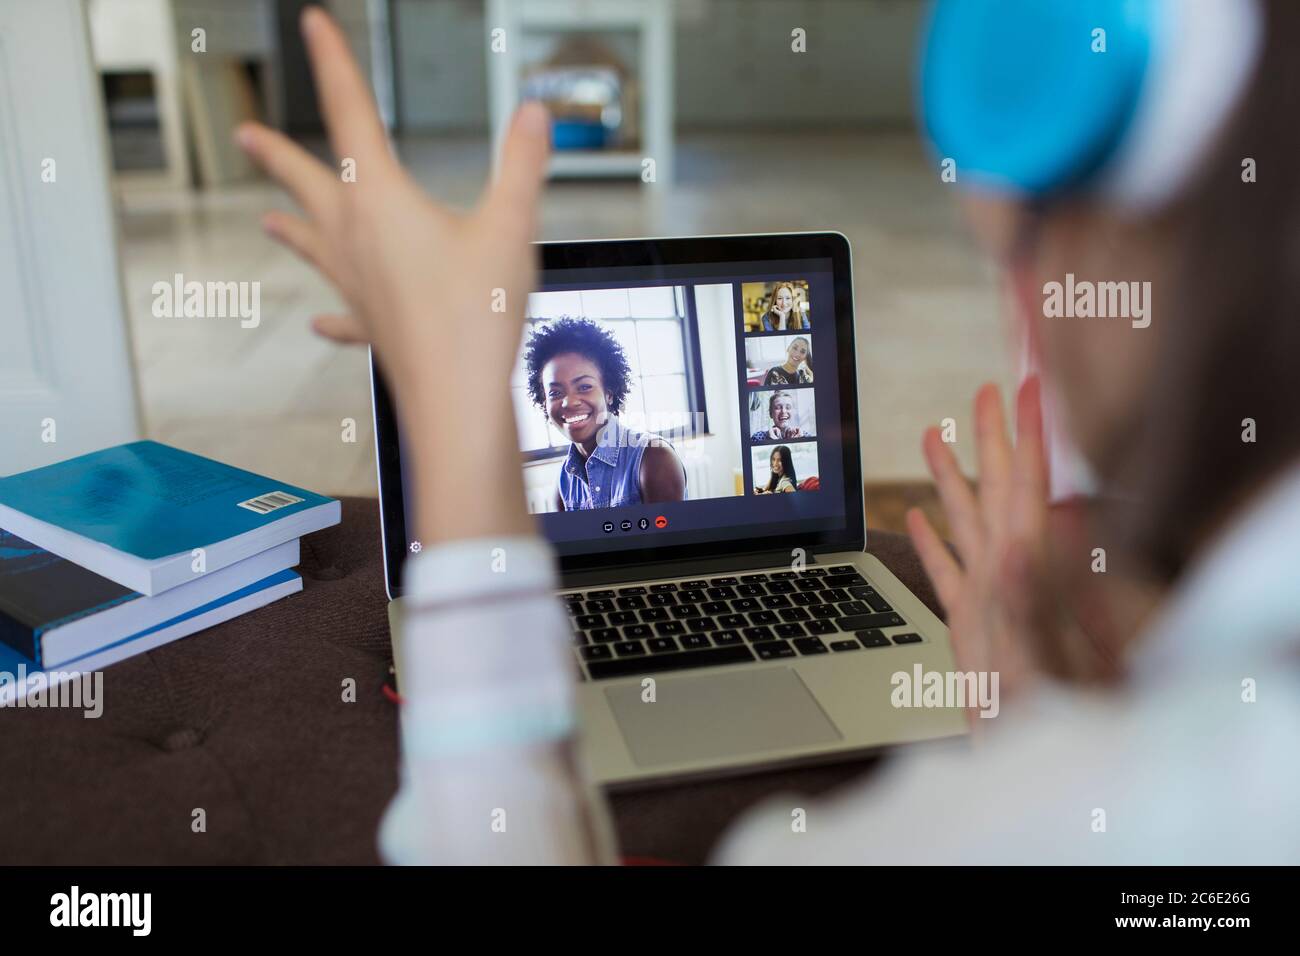 Woman video chatting with friends on laptop screen Stock Photo